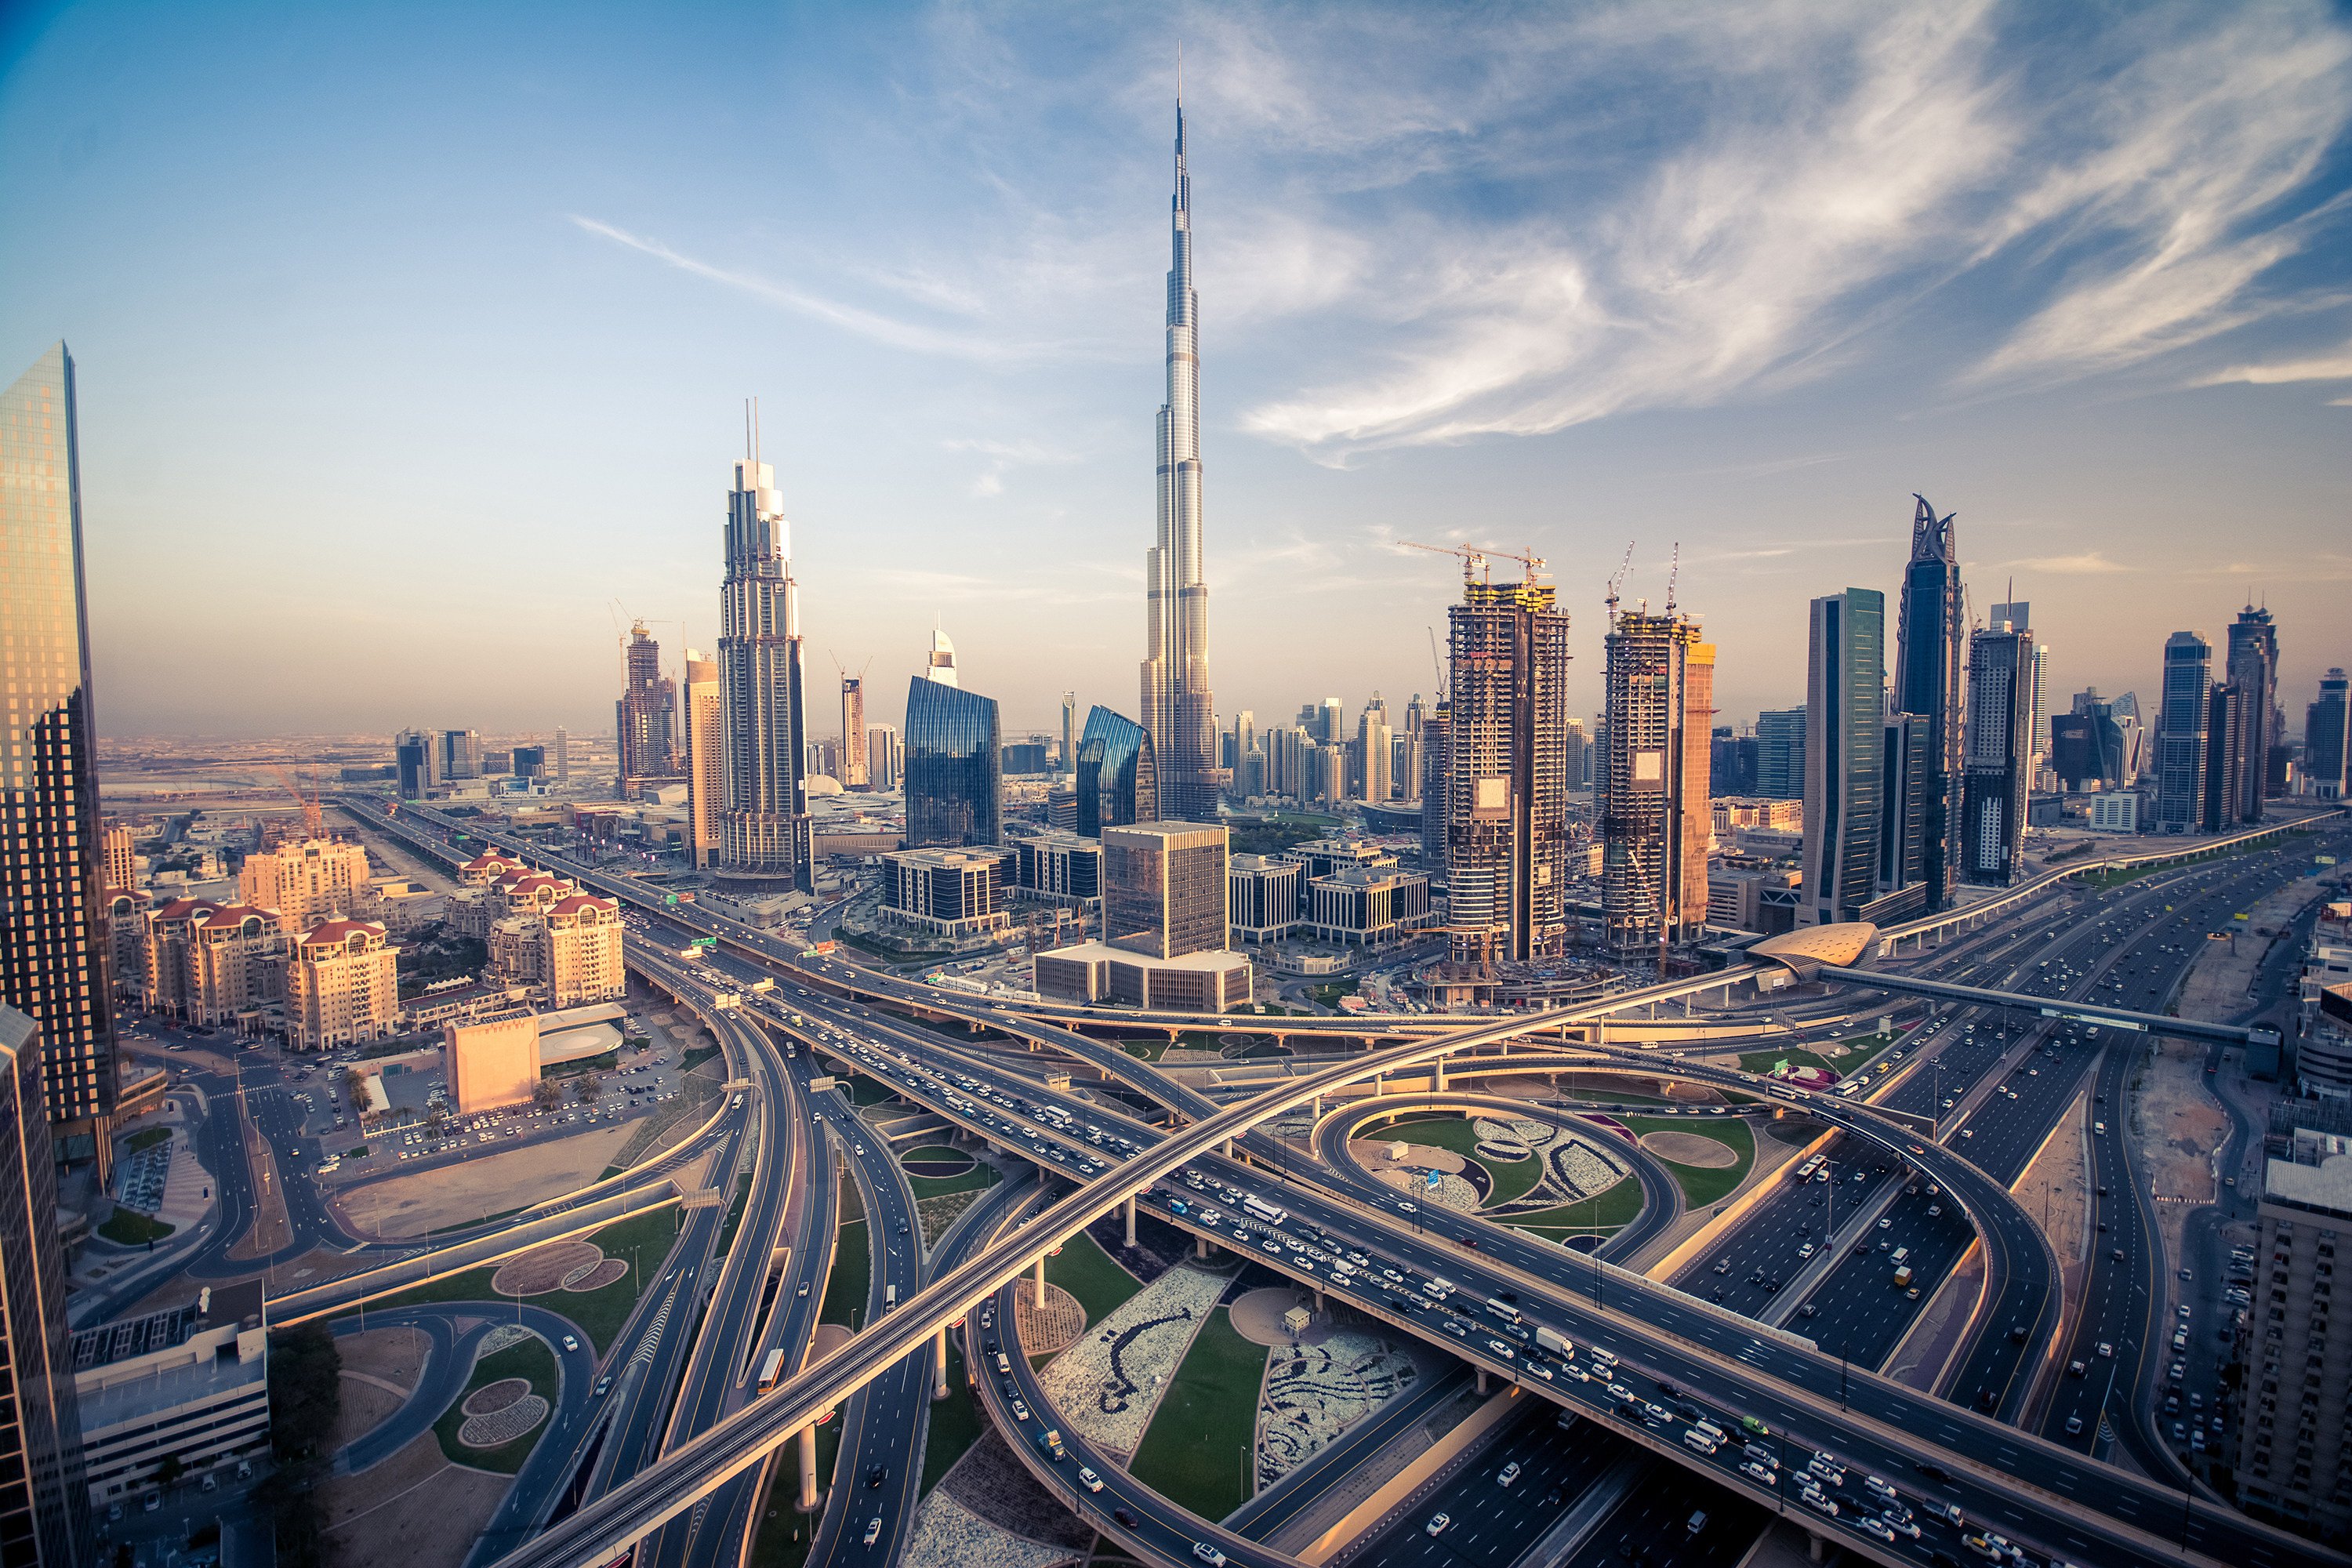 Dubai seeks more partnerships with Hong Kong, rather than competition, officials say. Photo: Shutterstock